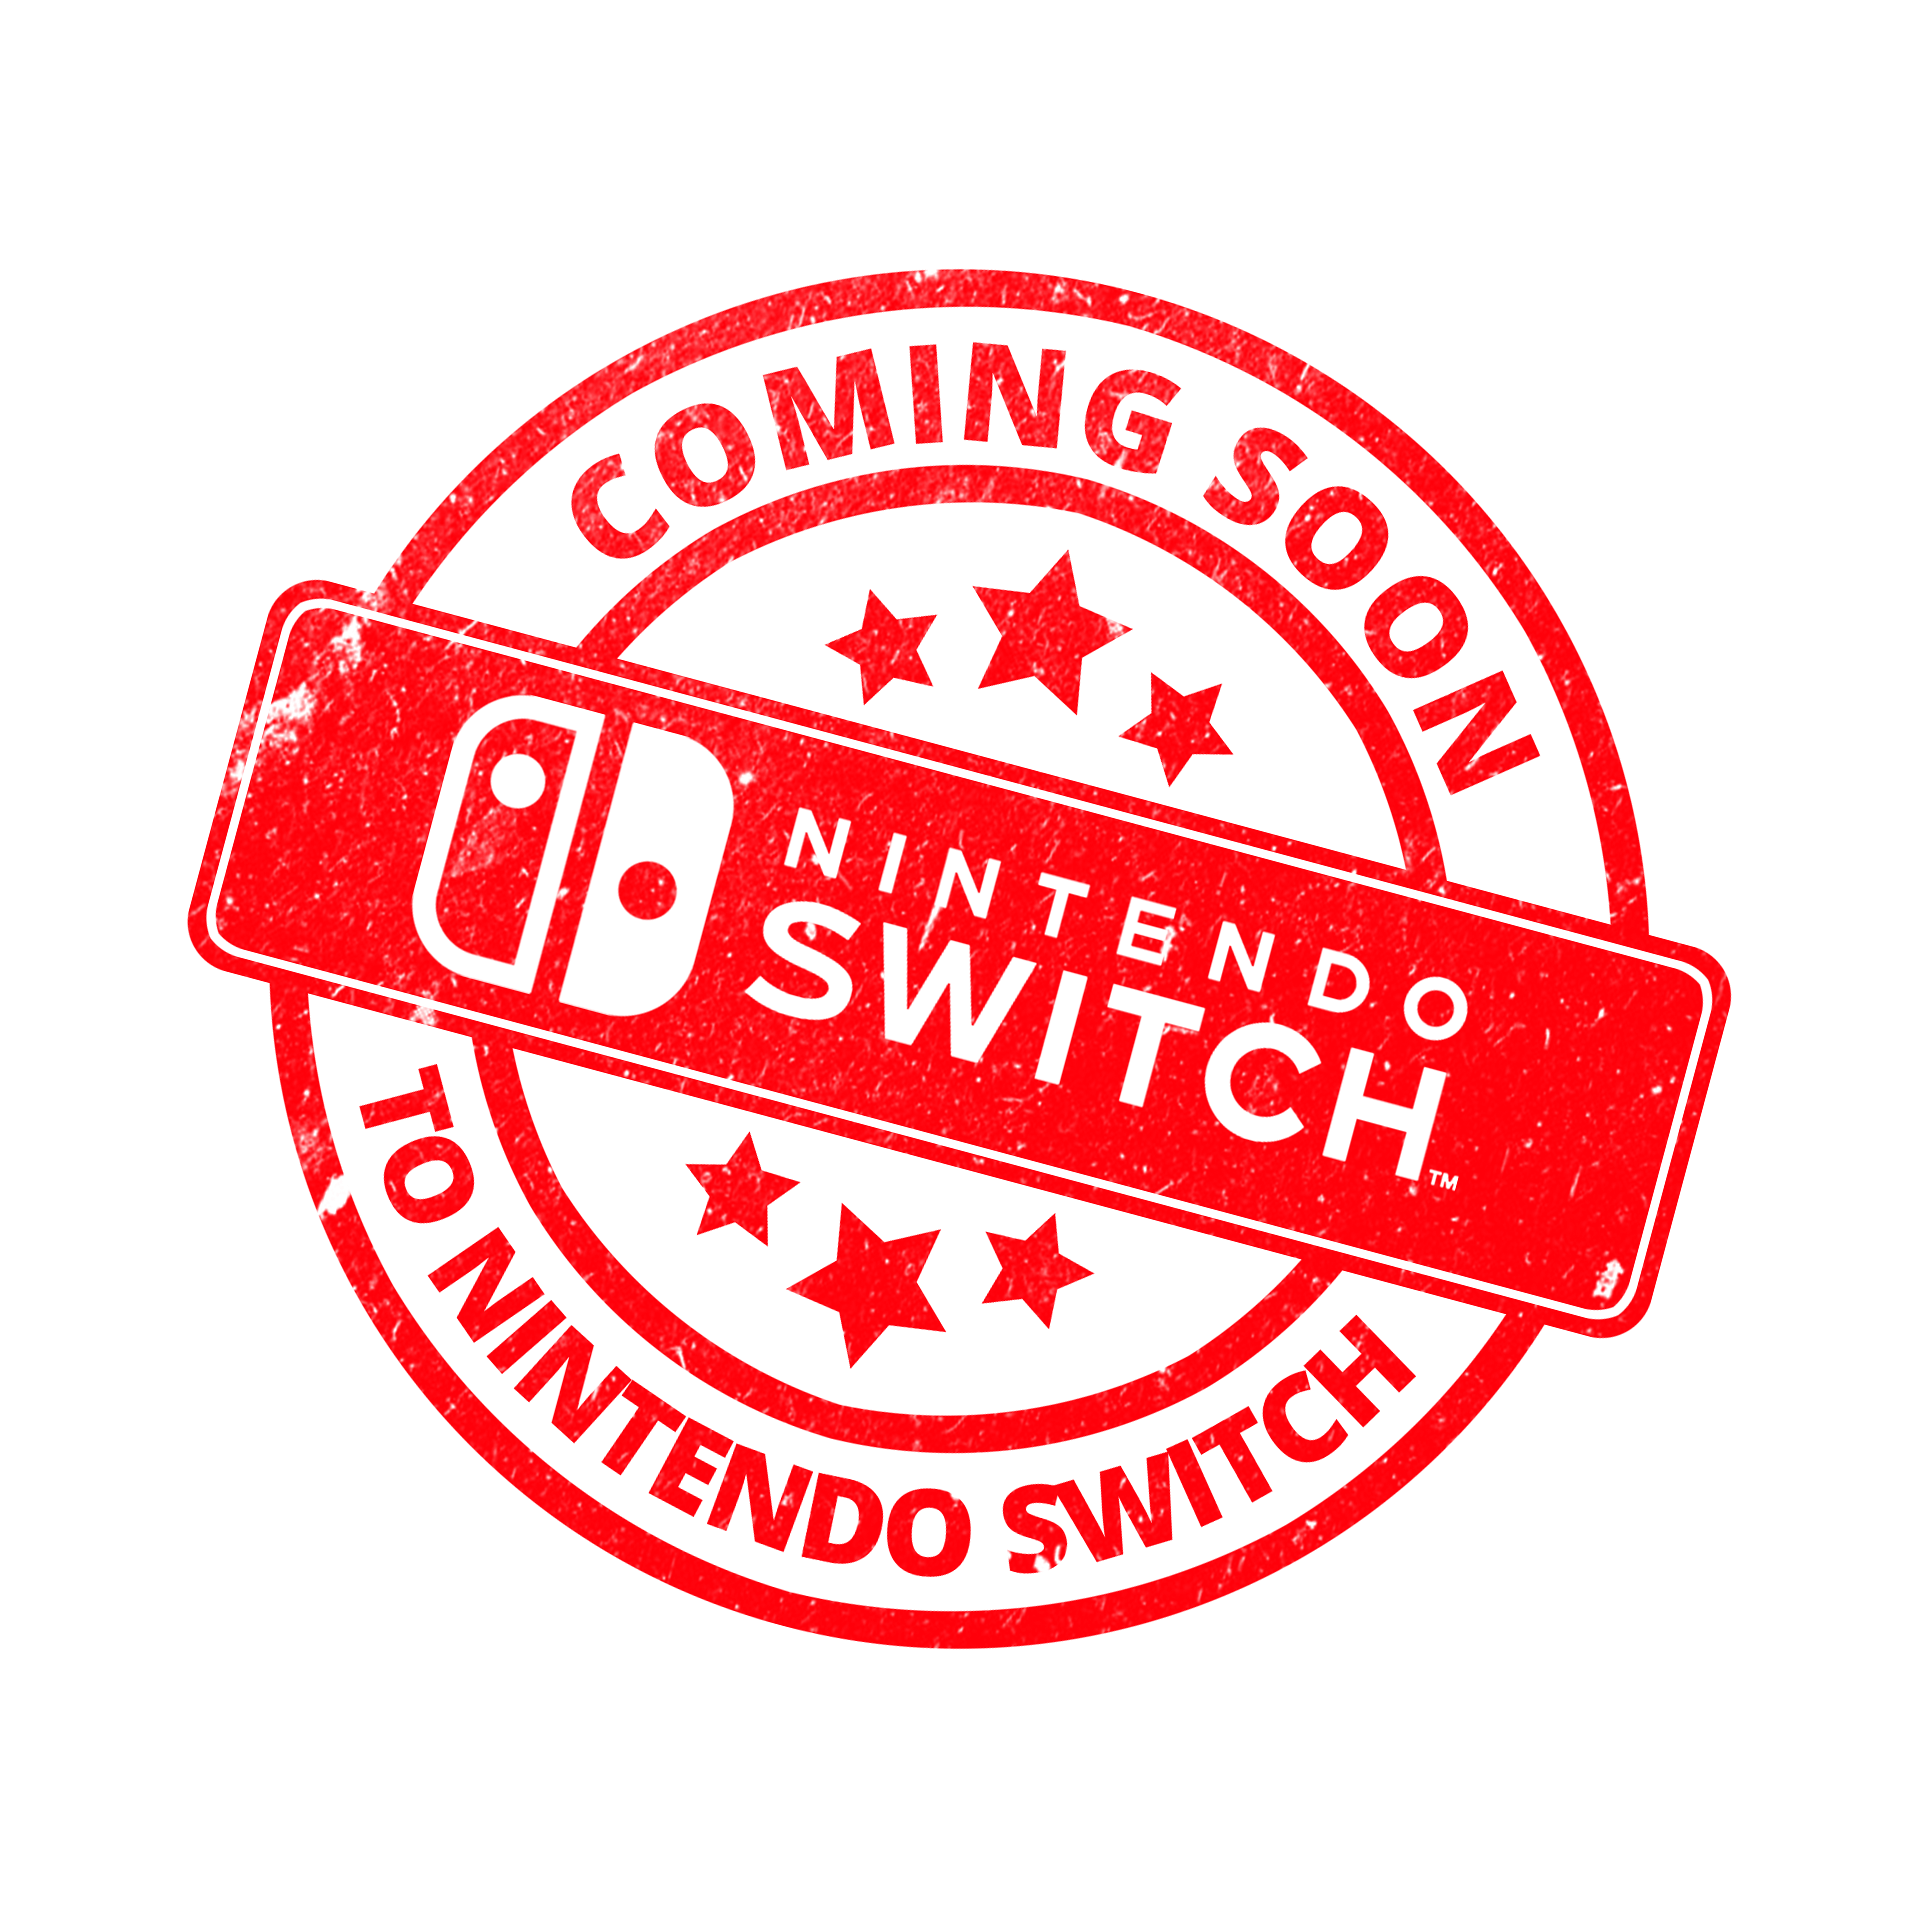 Coming soon Switch